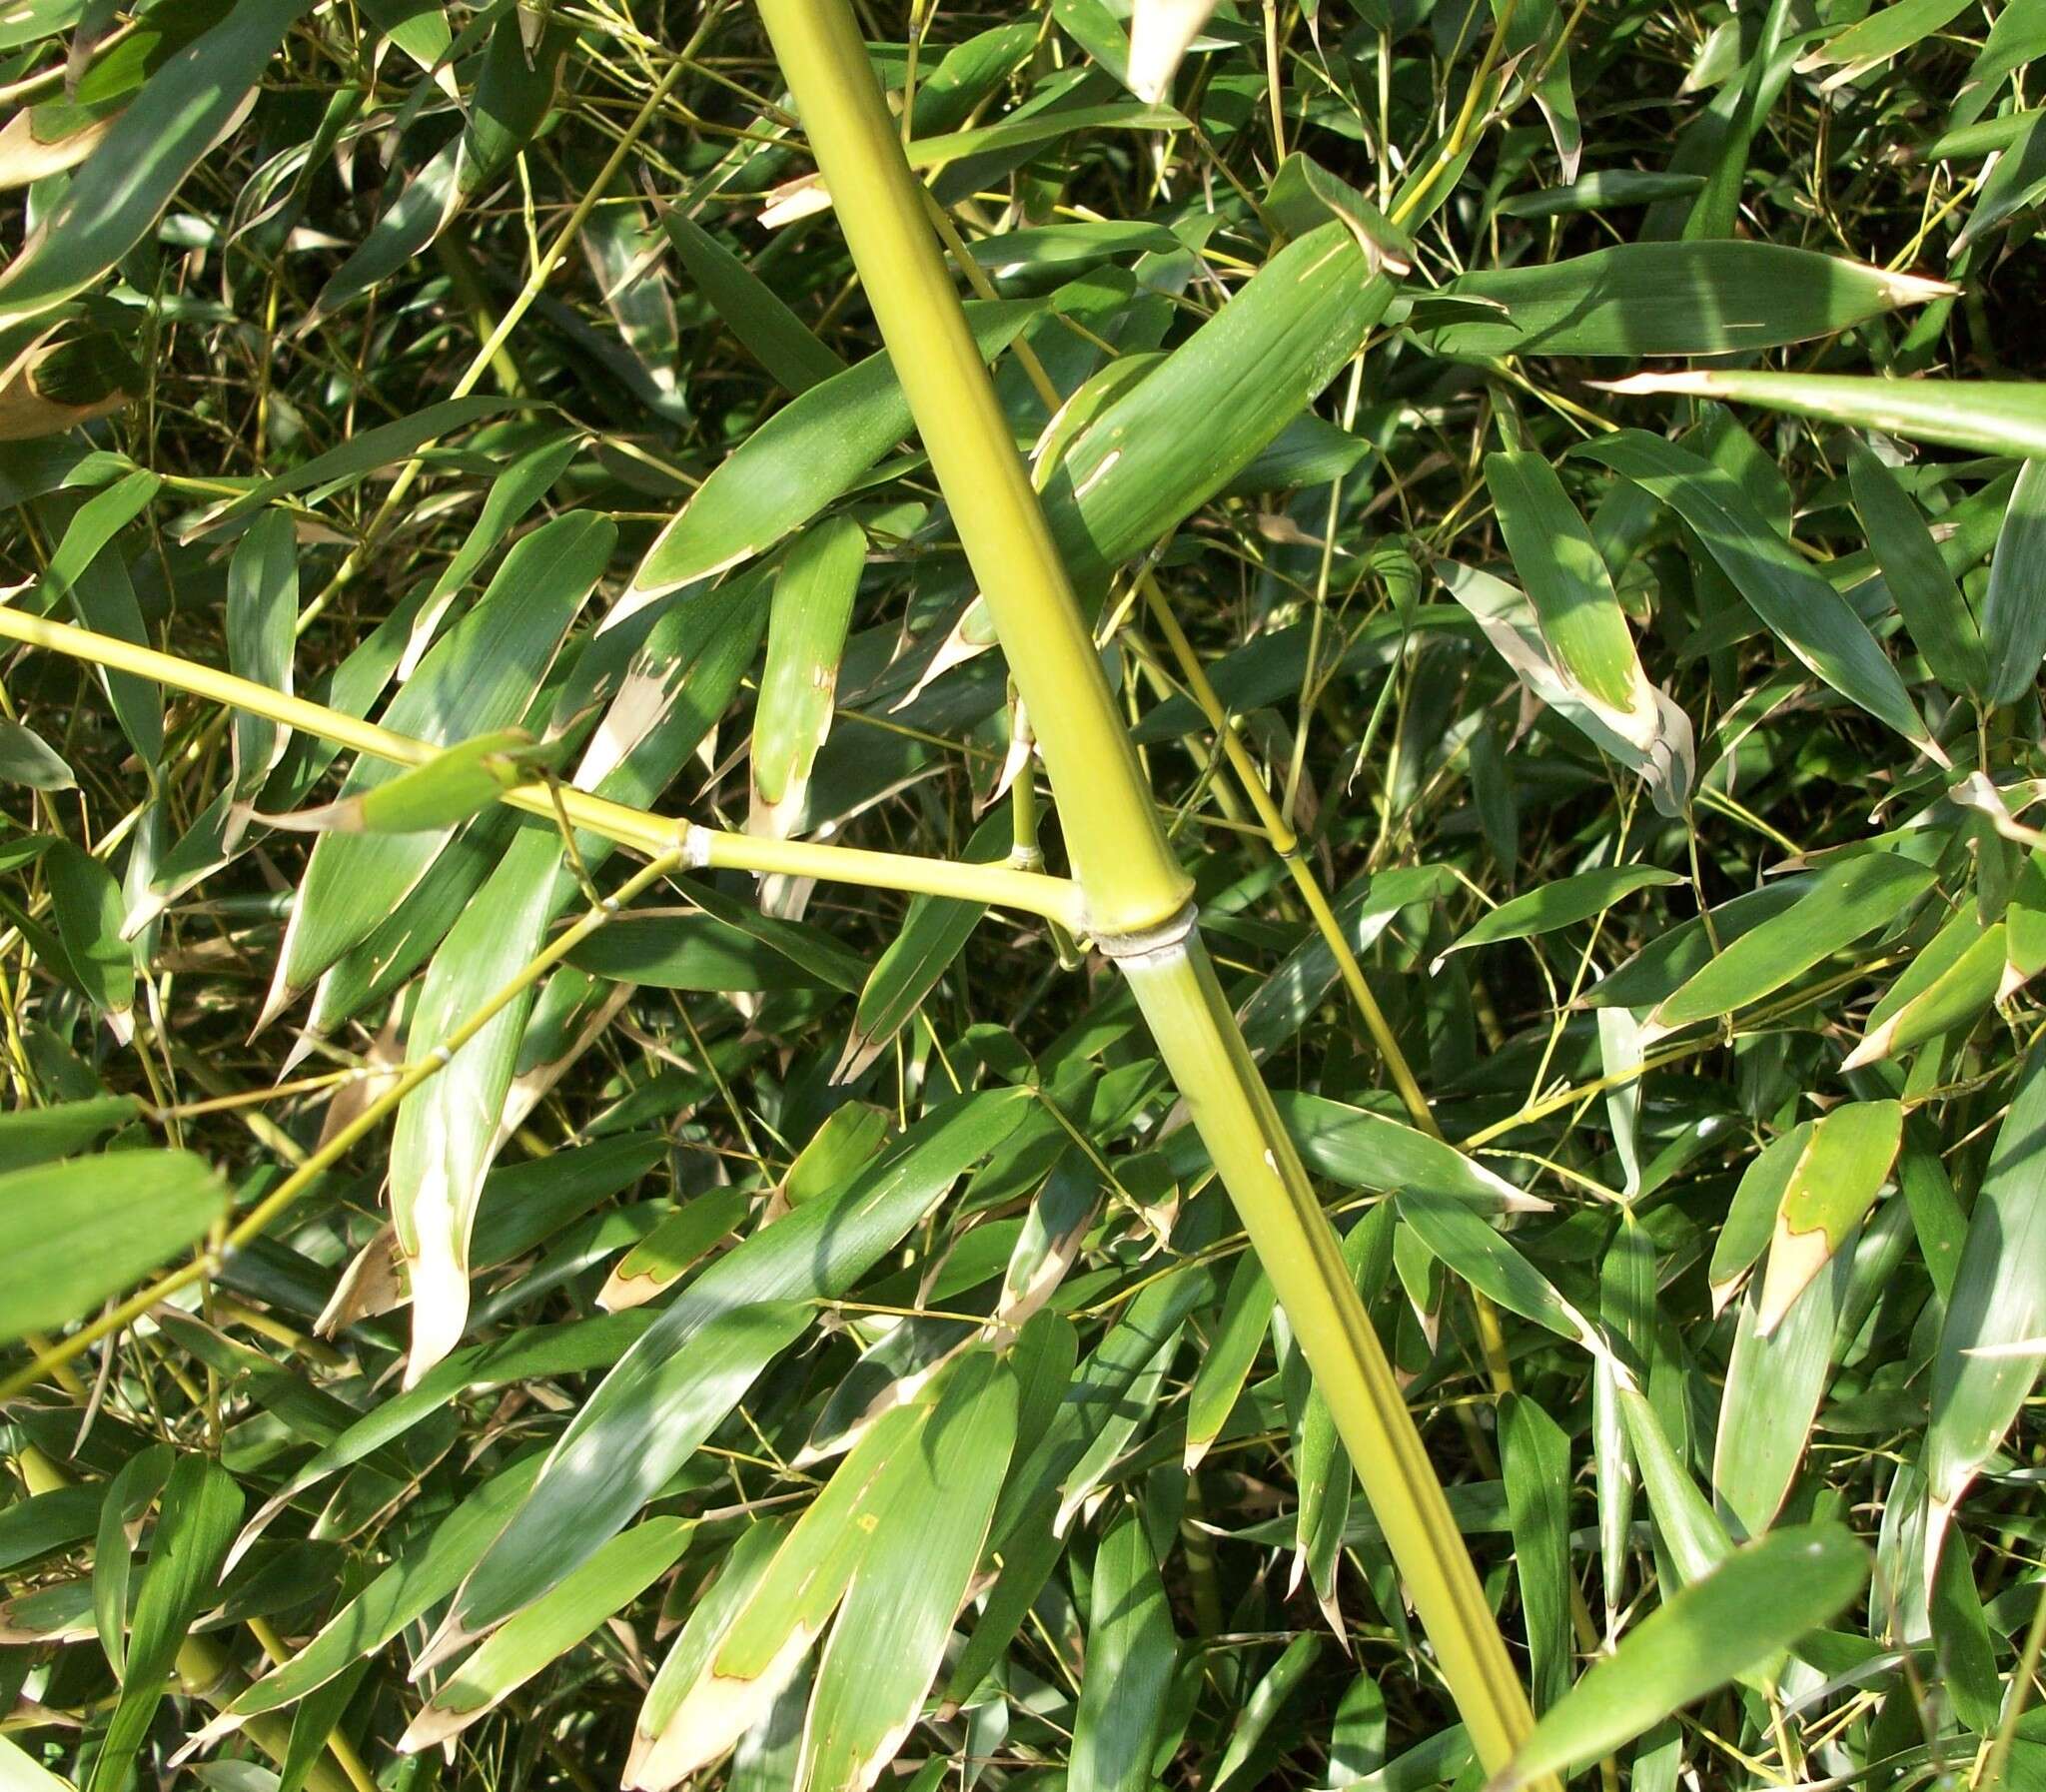 Image of golden bamboo